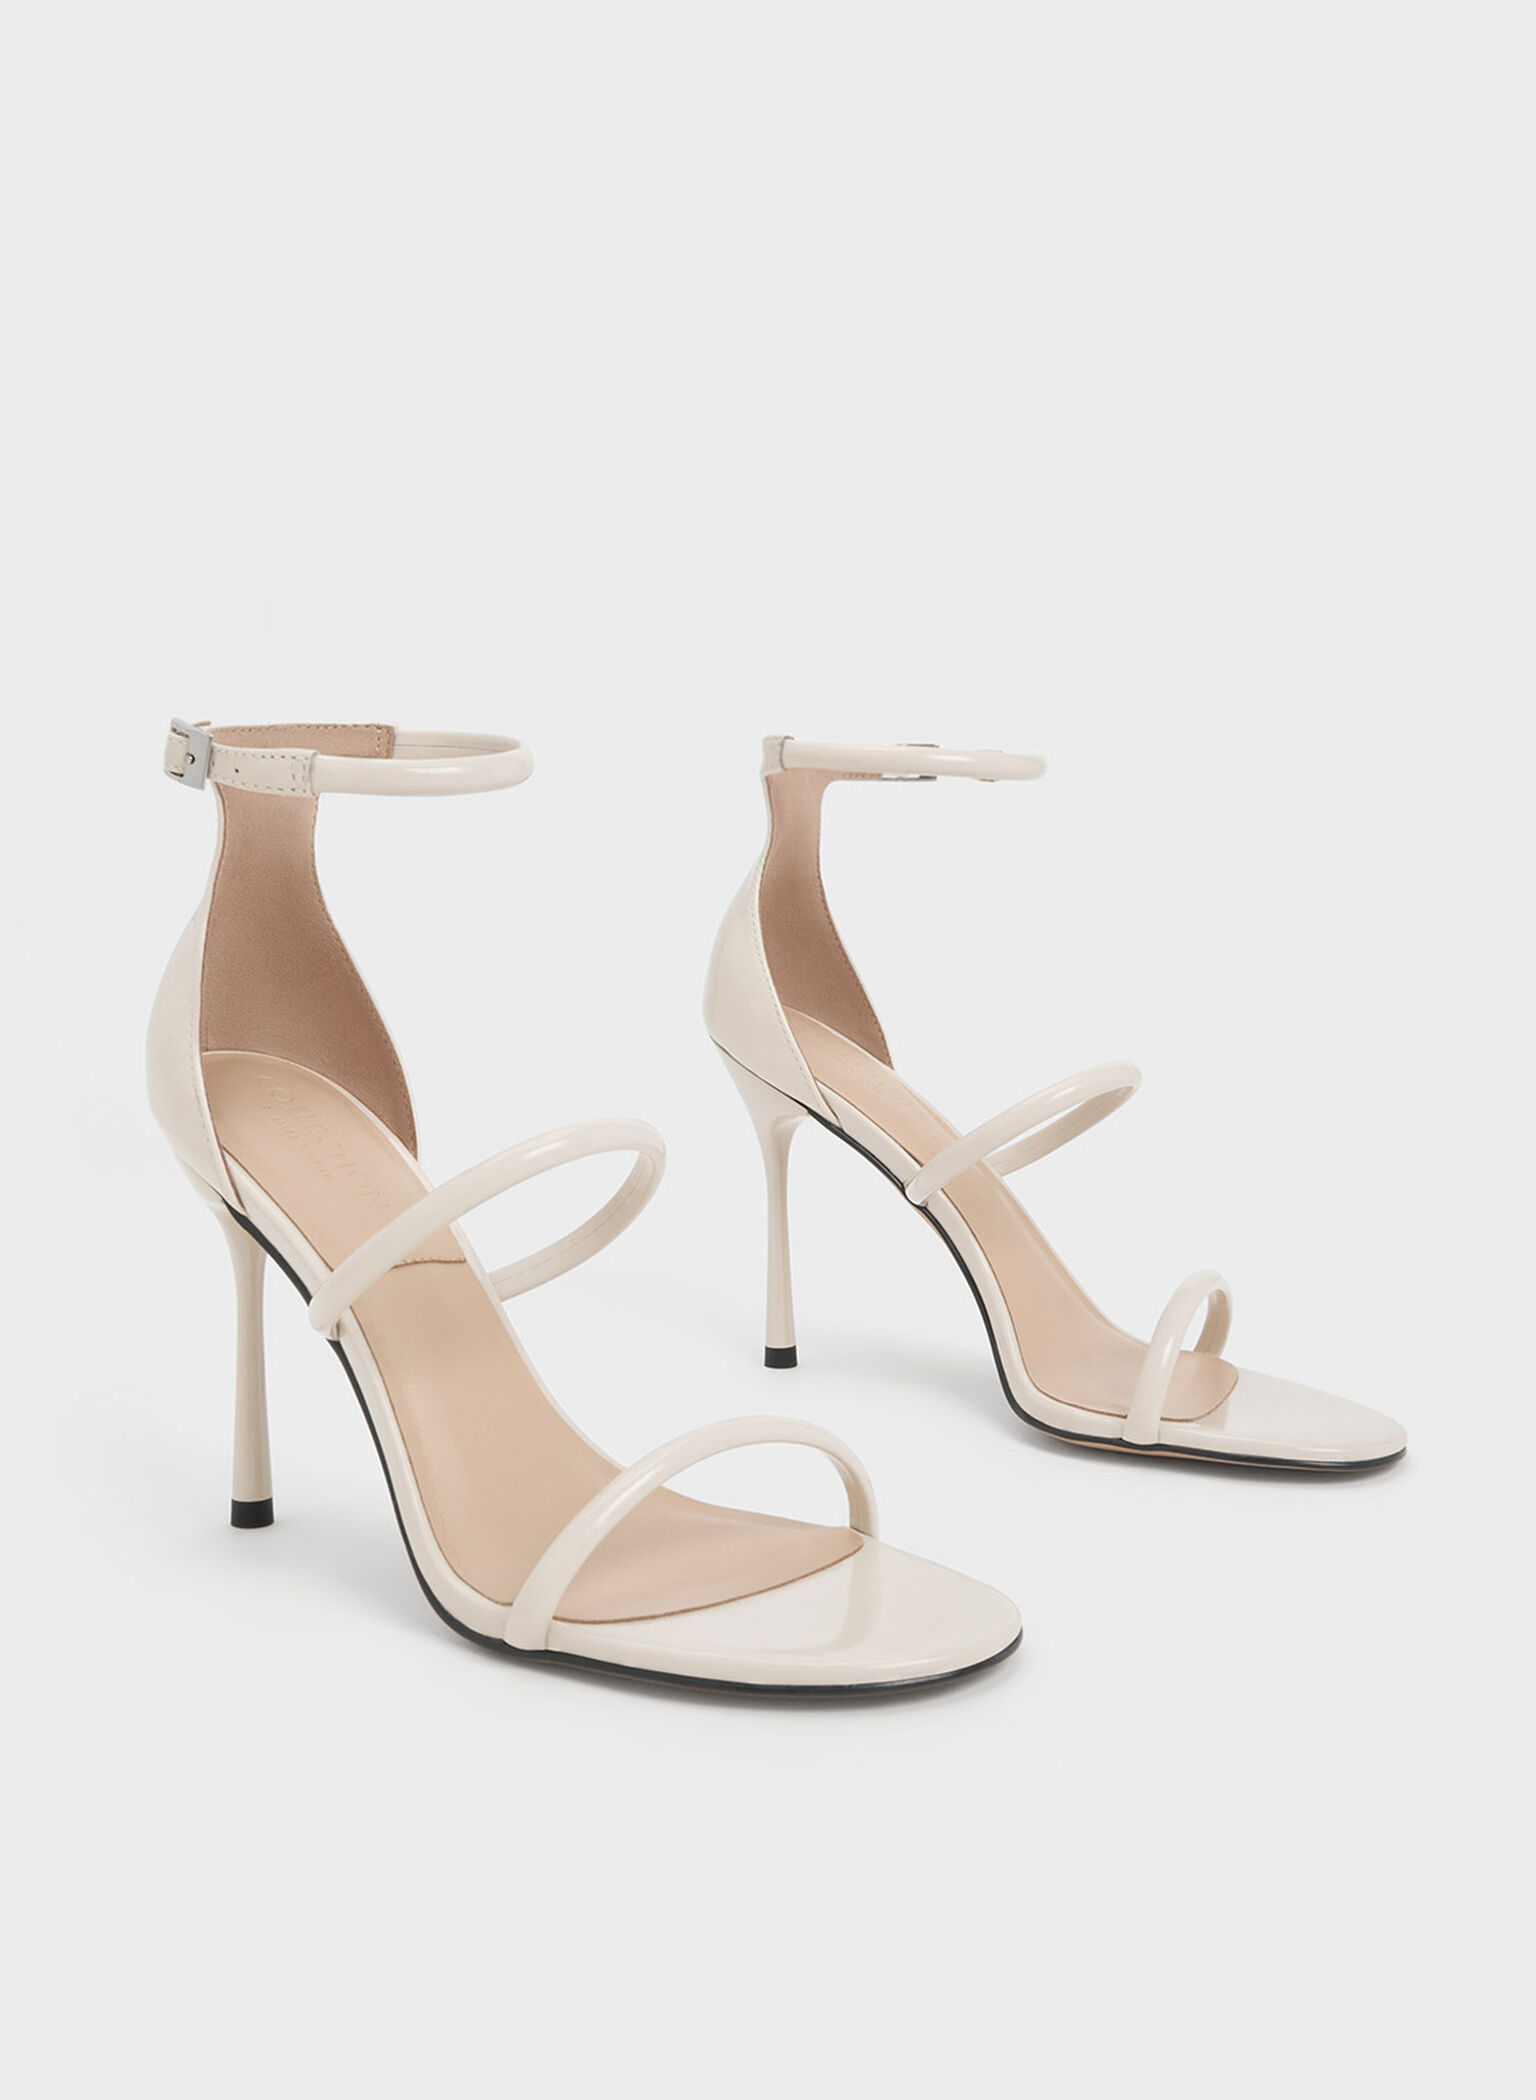 Chalk Patent Leather Triple Strap Heeled Sandals - CHARLES & KEITH SG